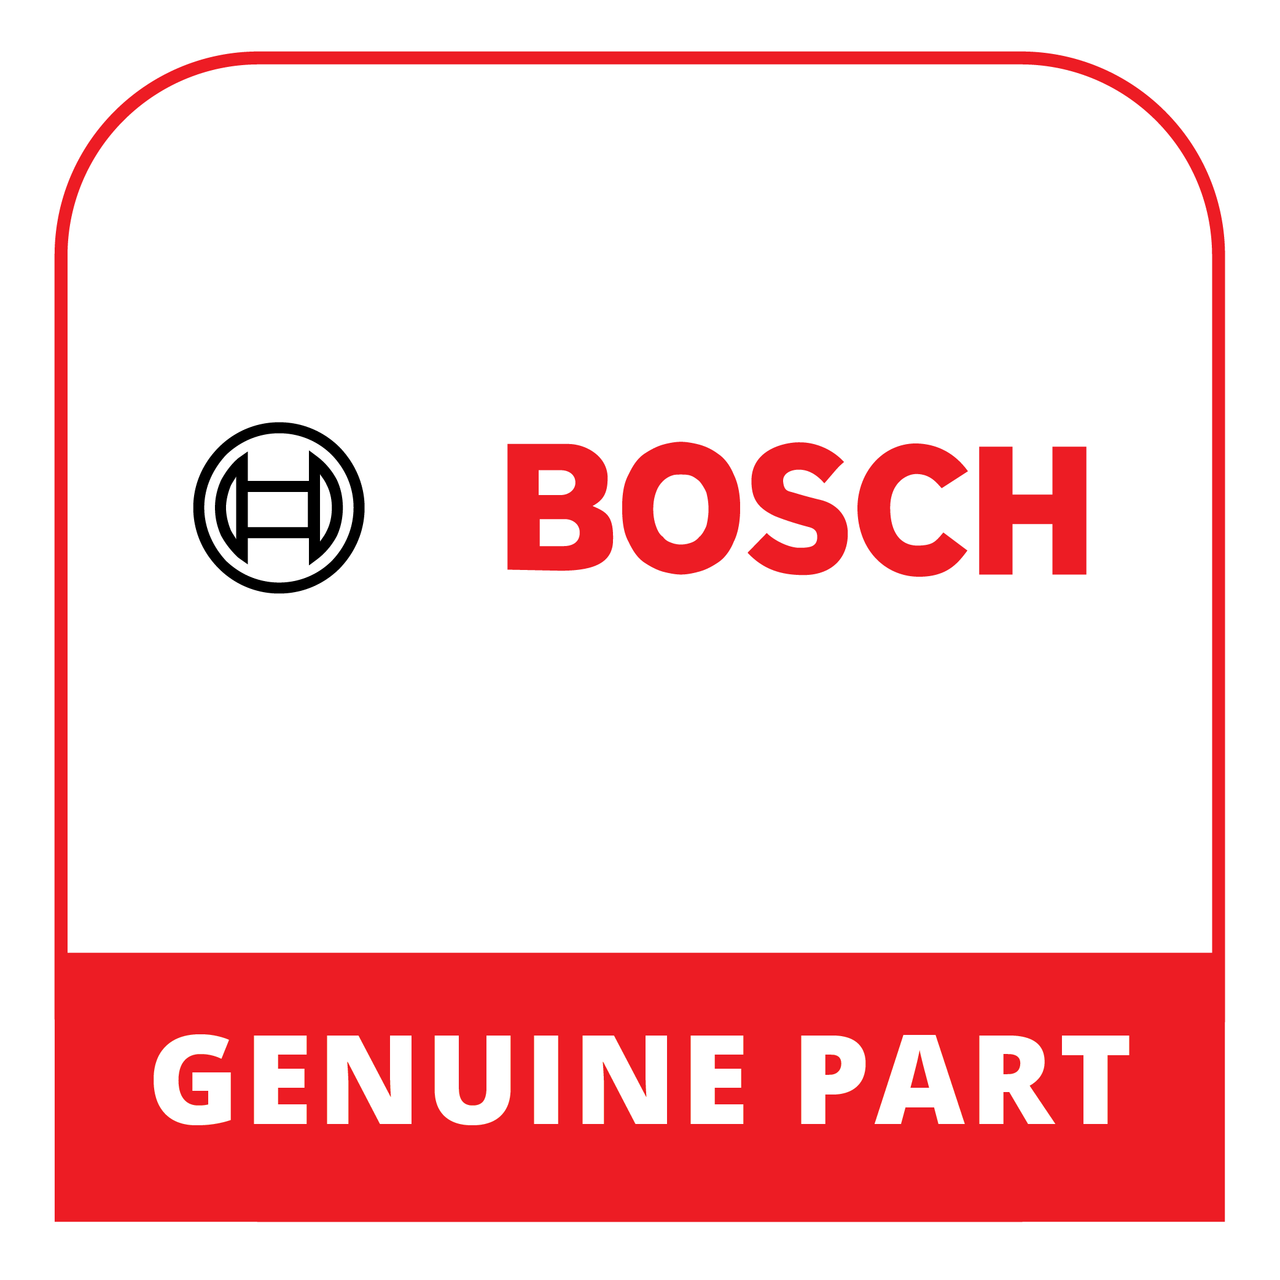 Bosch (Thermador) 00746651 - Ceramic Plate - Genuine Bosch (Thermador) Part